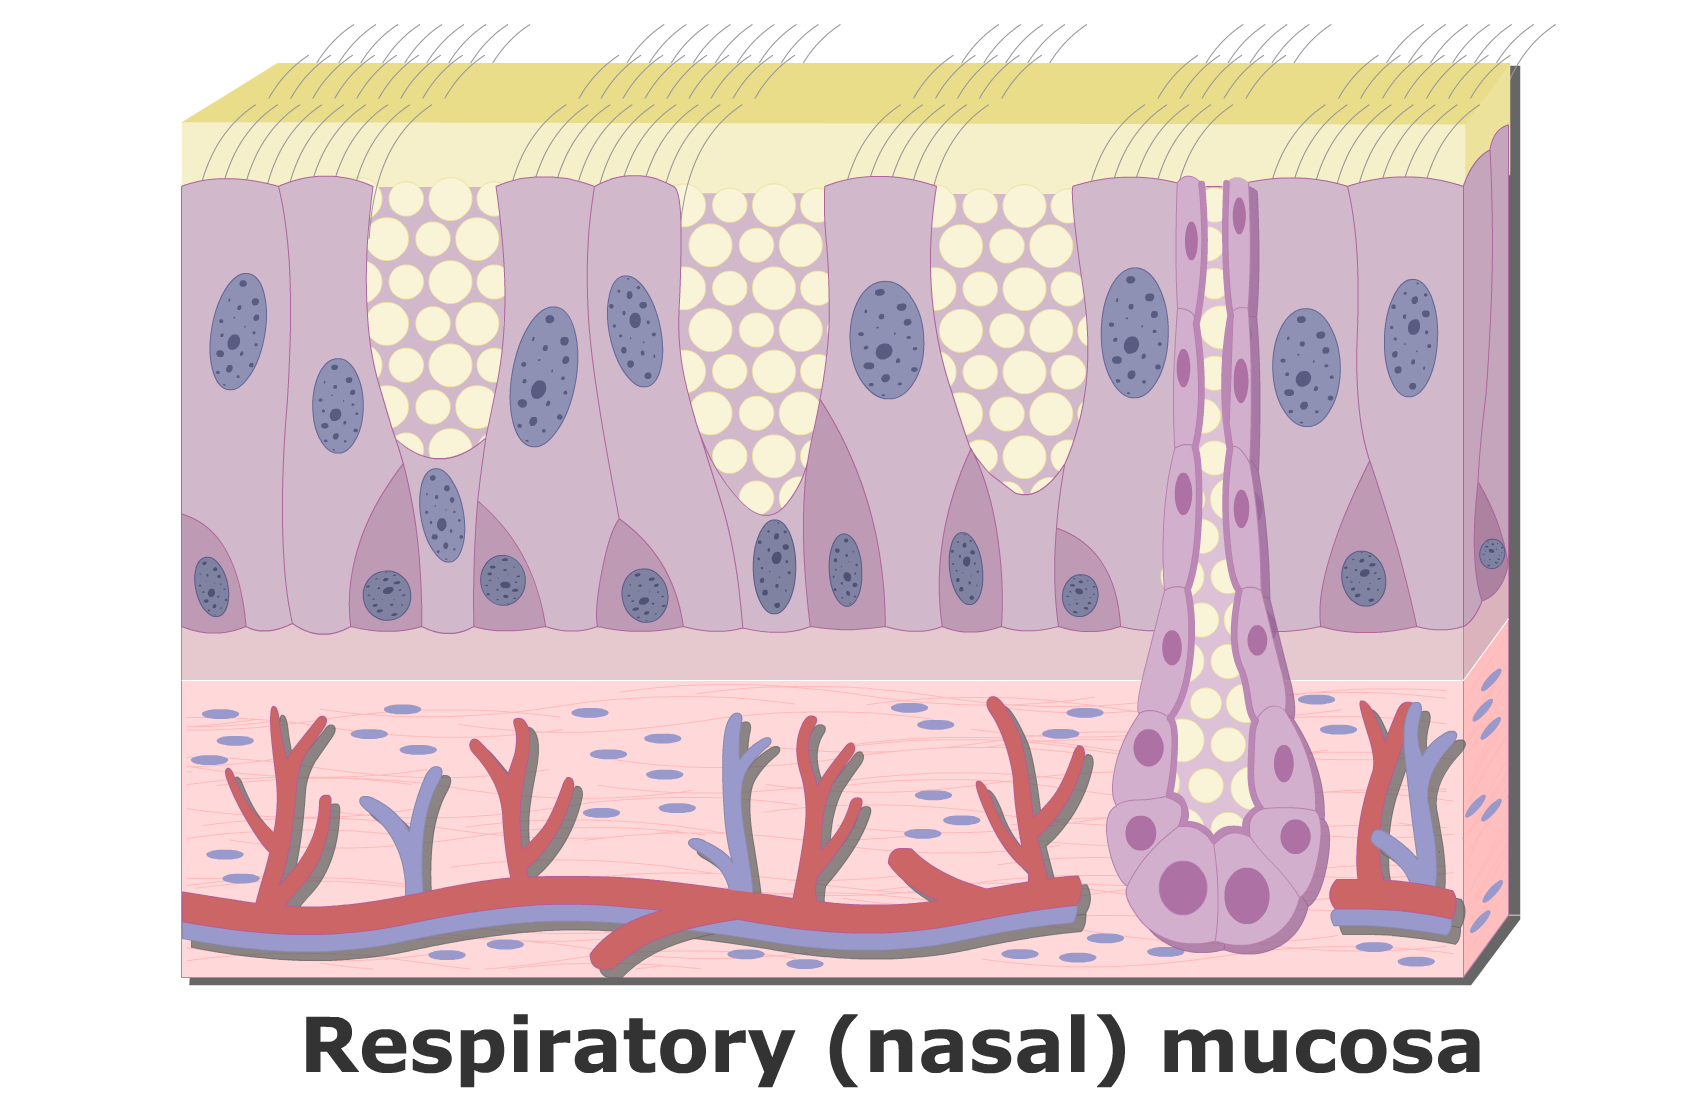 an expanded view of the respiratory mucosa